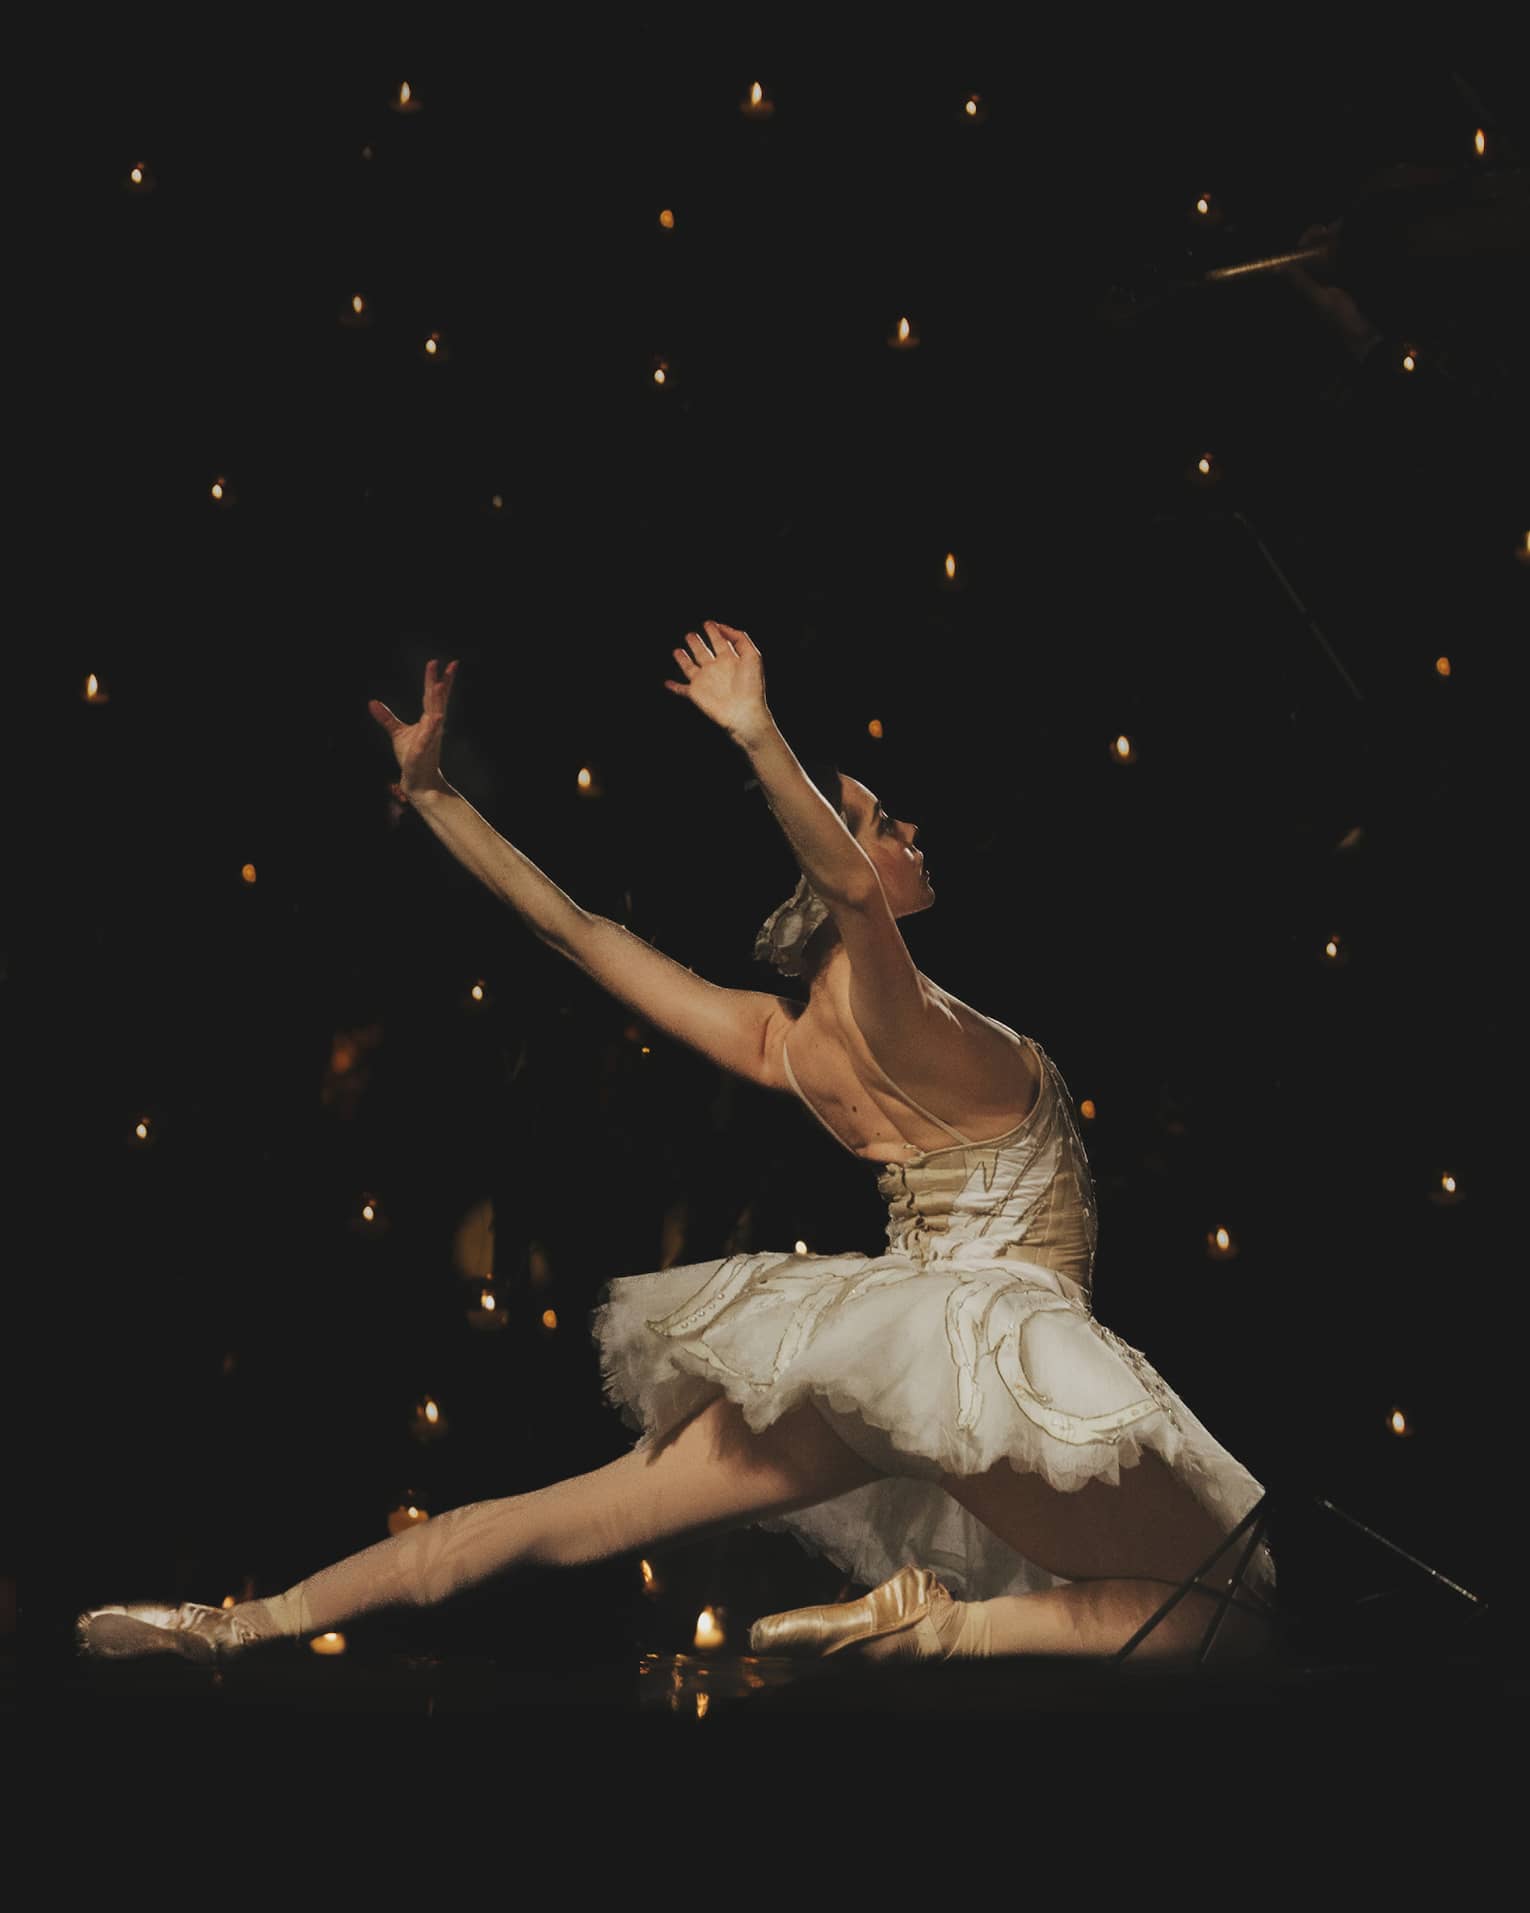 A ballerina dancing in front of a dark background.